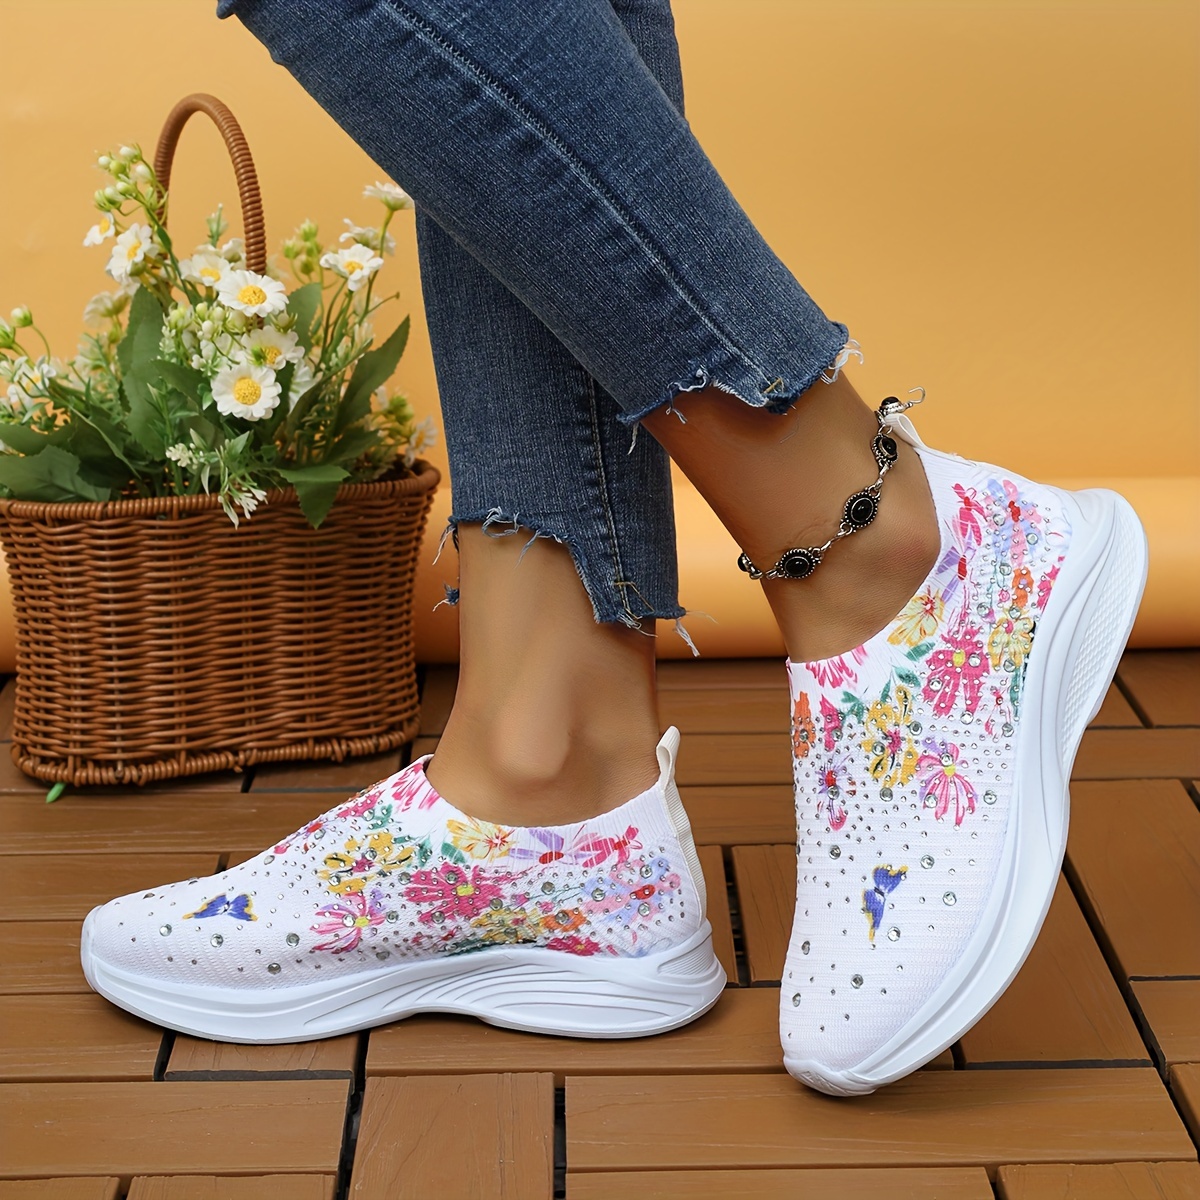 

Women's Walking Shoes, Floral Slip-on Breathable Sneakers, Comfortable Camping Shoes, Casual Outdoor Stylish Rhinestone Low-top Sneakers, Eye-catching Butterfly Print